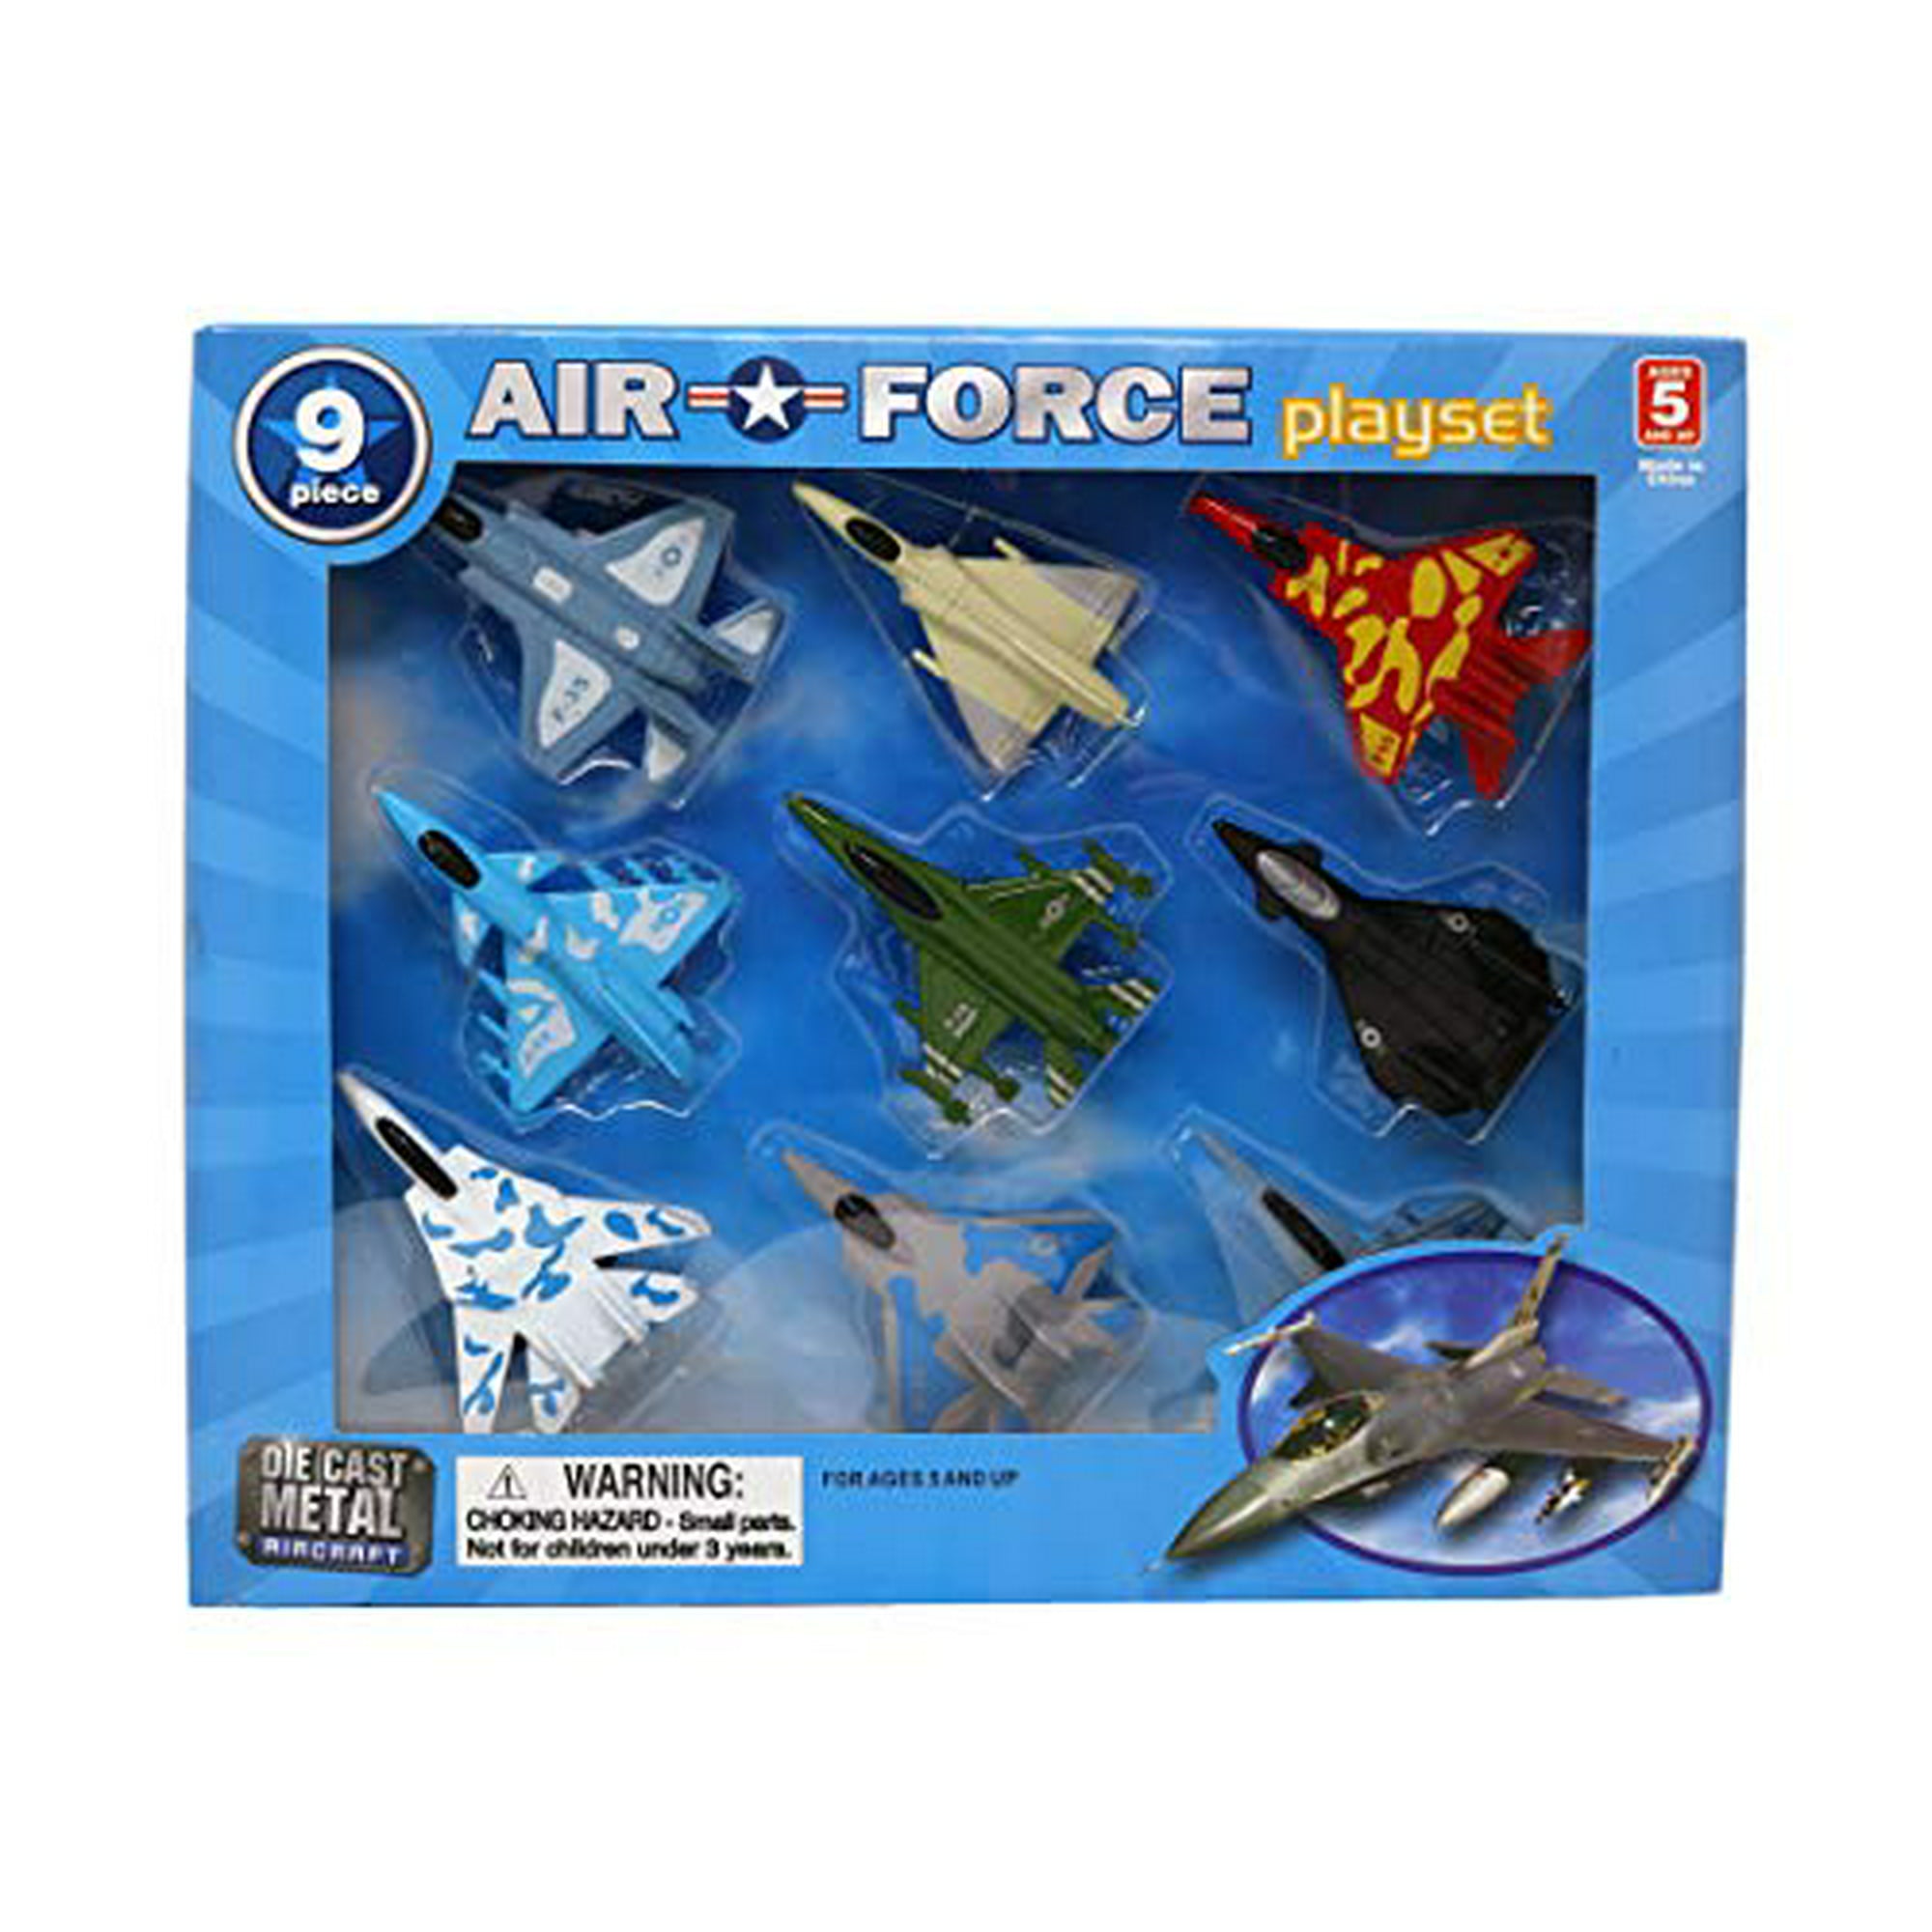 Metal die cast toy air plane set of military planes and jets Smart N Inc. Pack of 9 